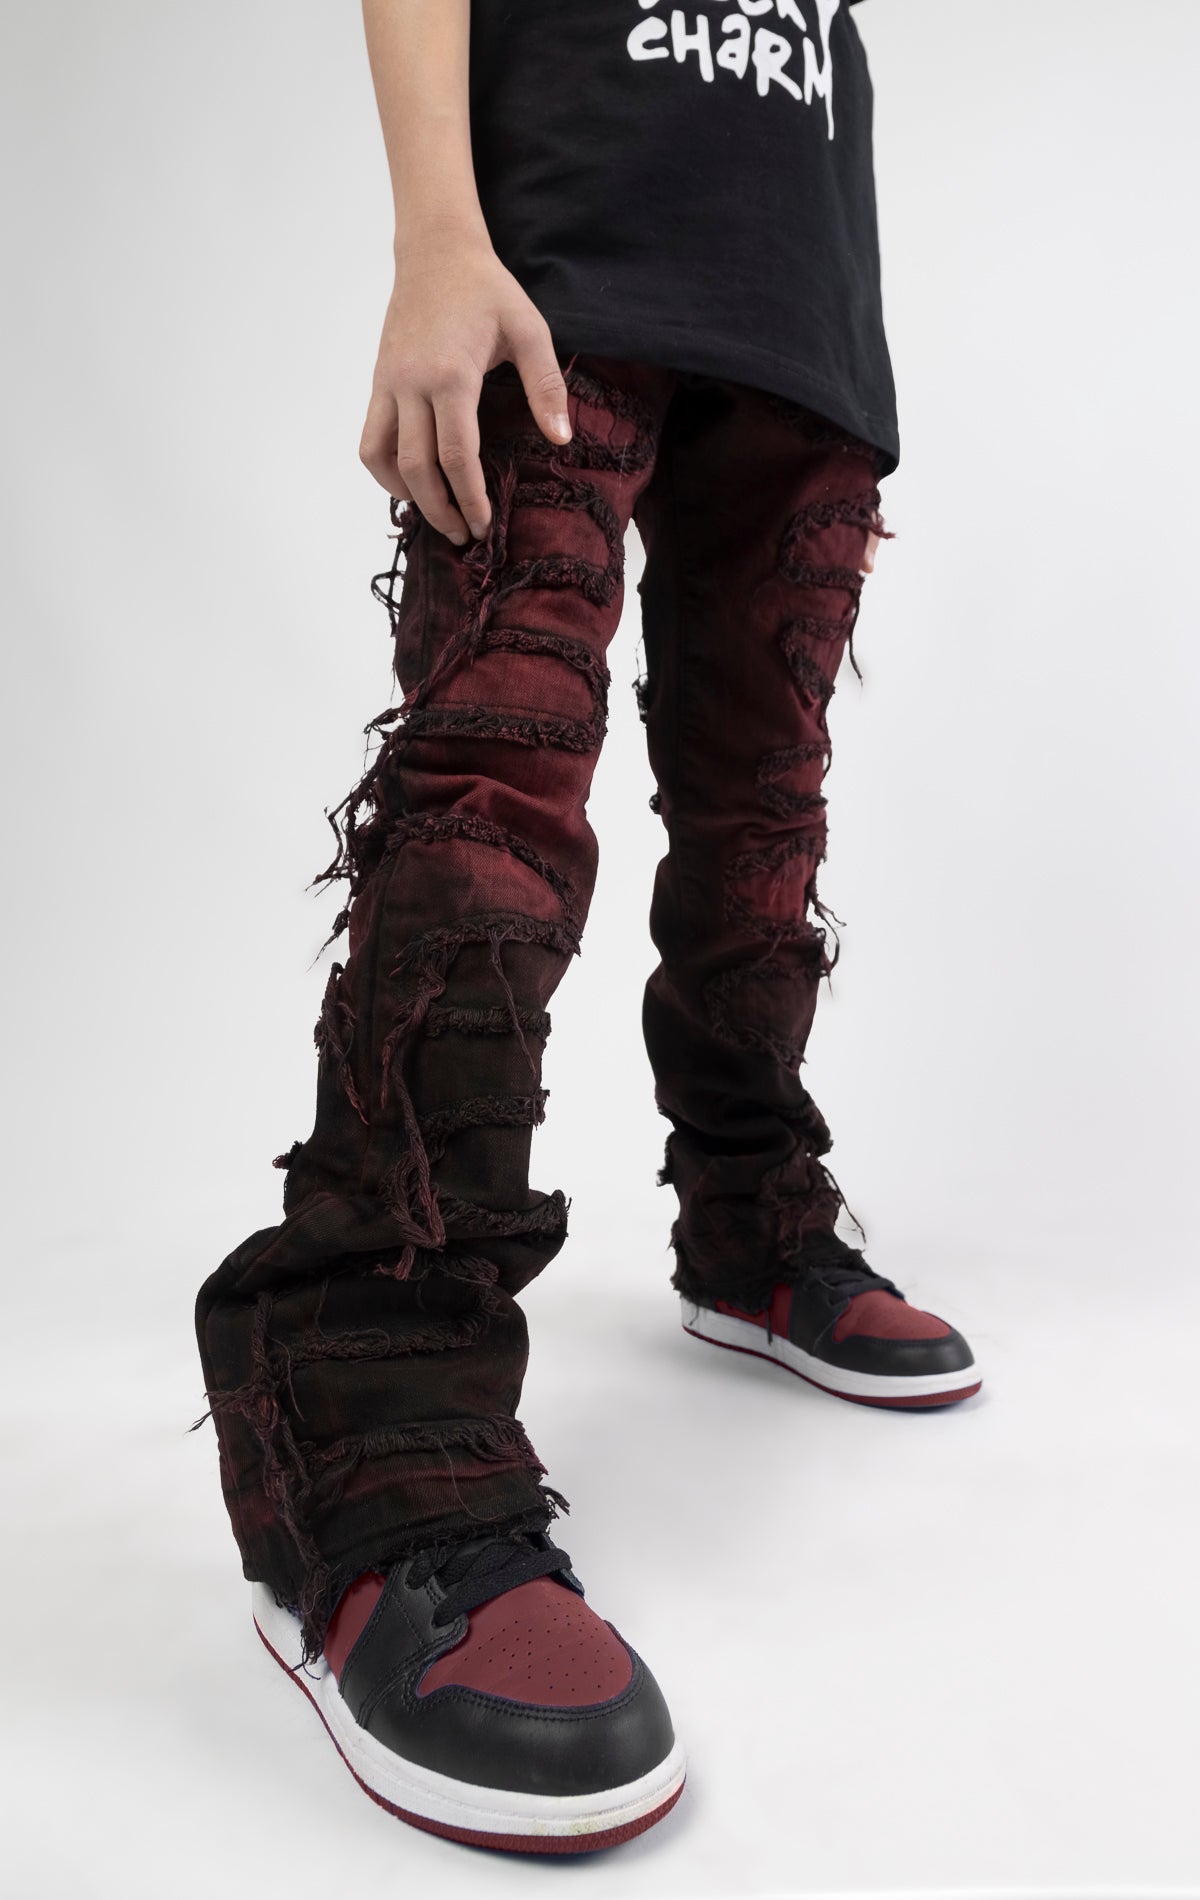 Skinny fit Regular rise denim with extended length for maximum stacks. Magma ombre wash with rip and repair design featuring self fabric backing. Patches and abrasions throughout for a trendy and edgy look.